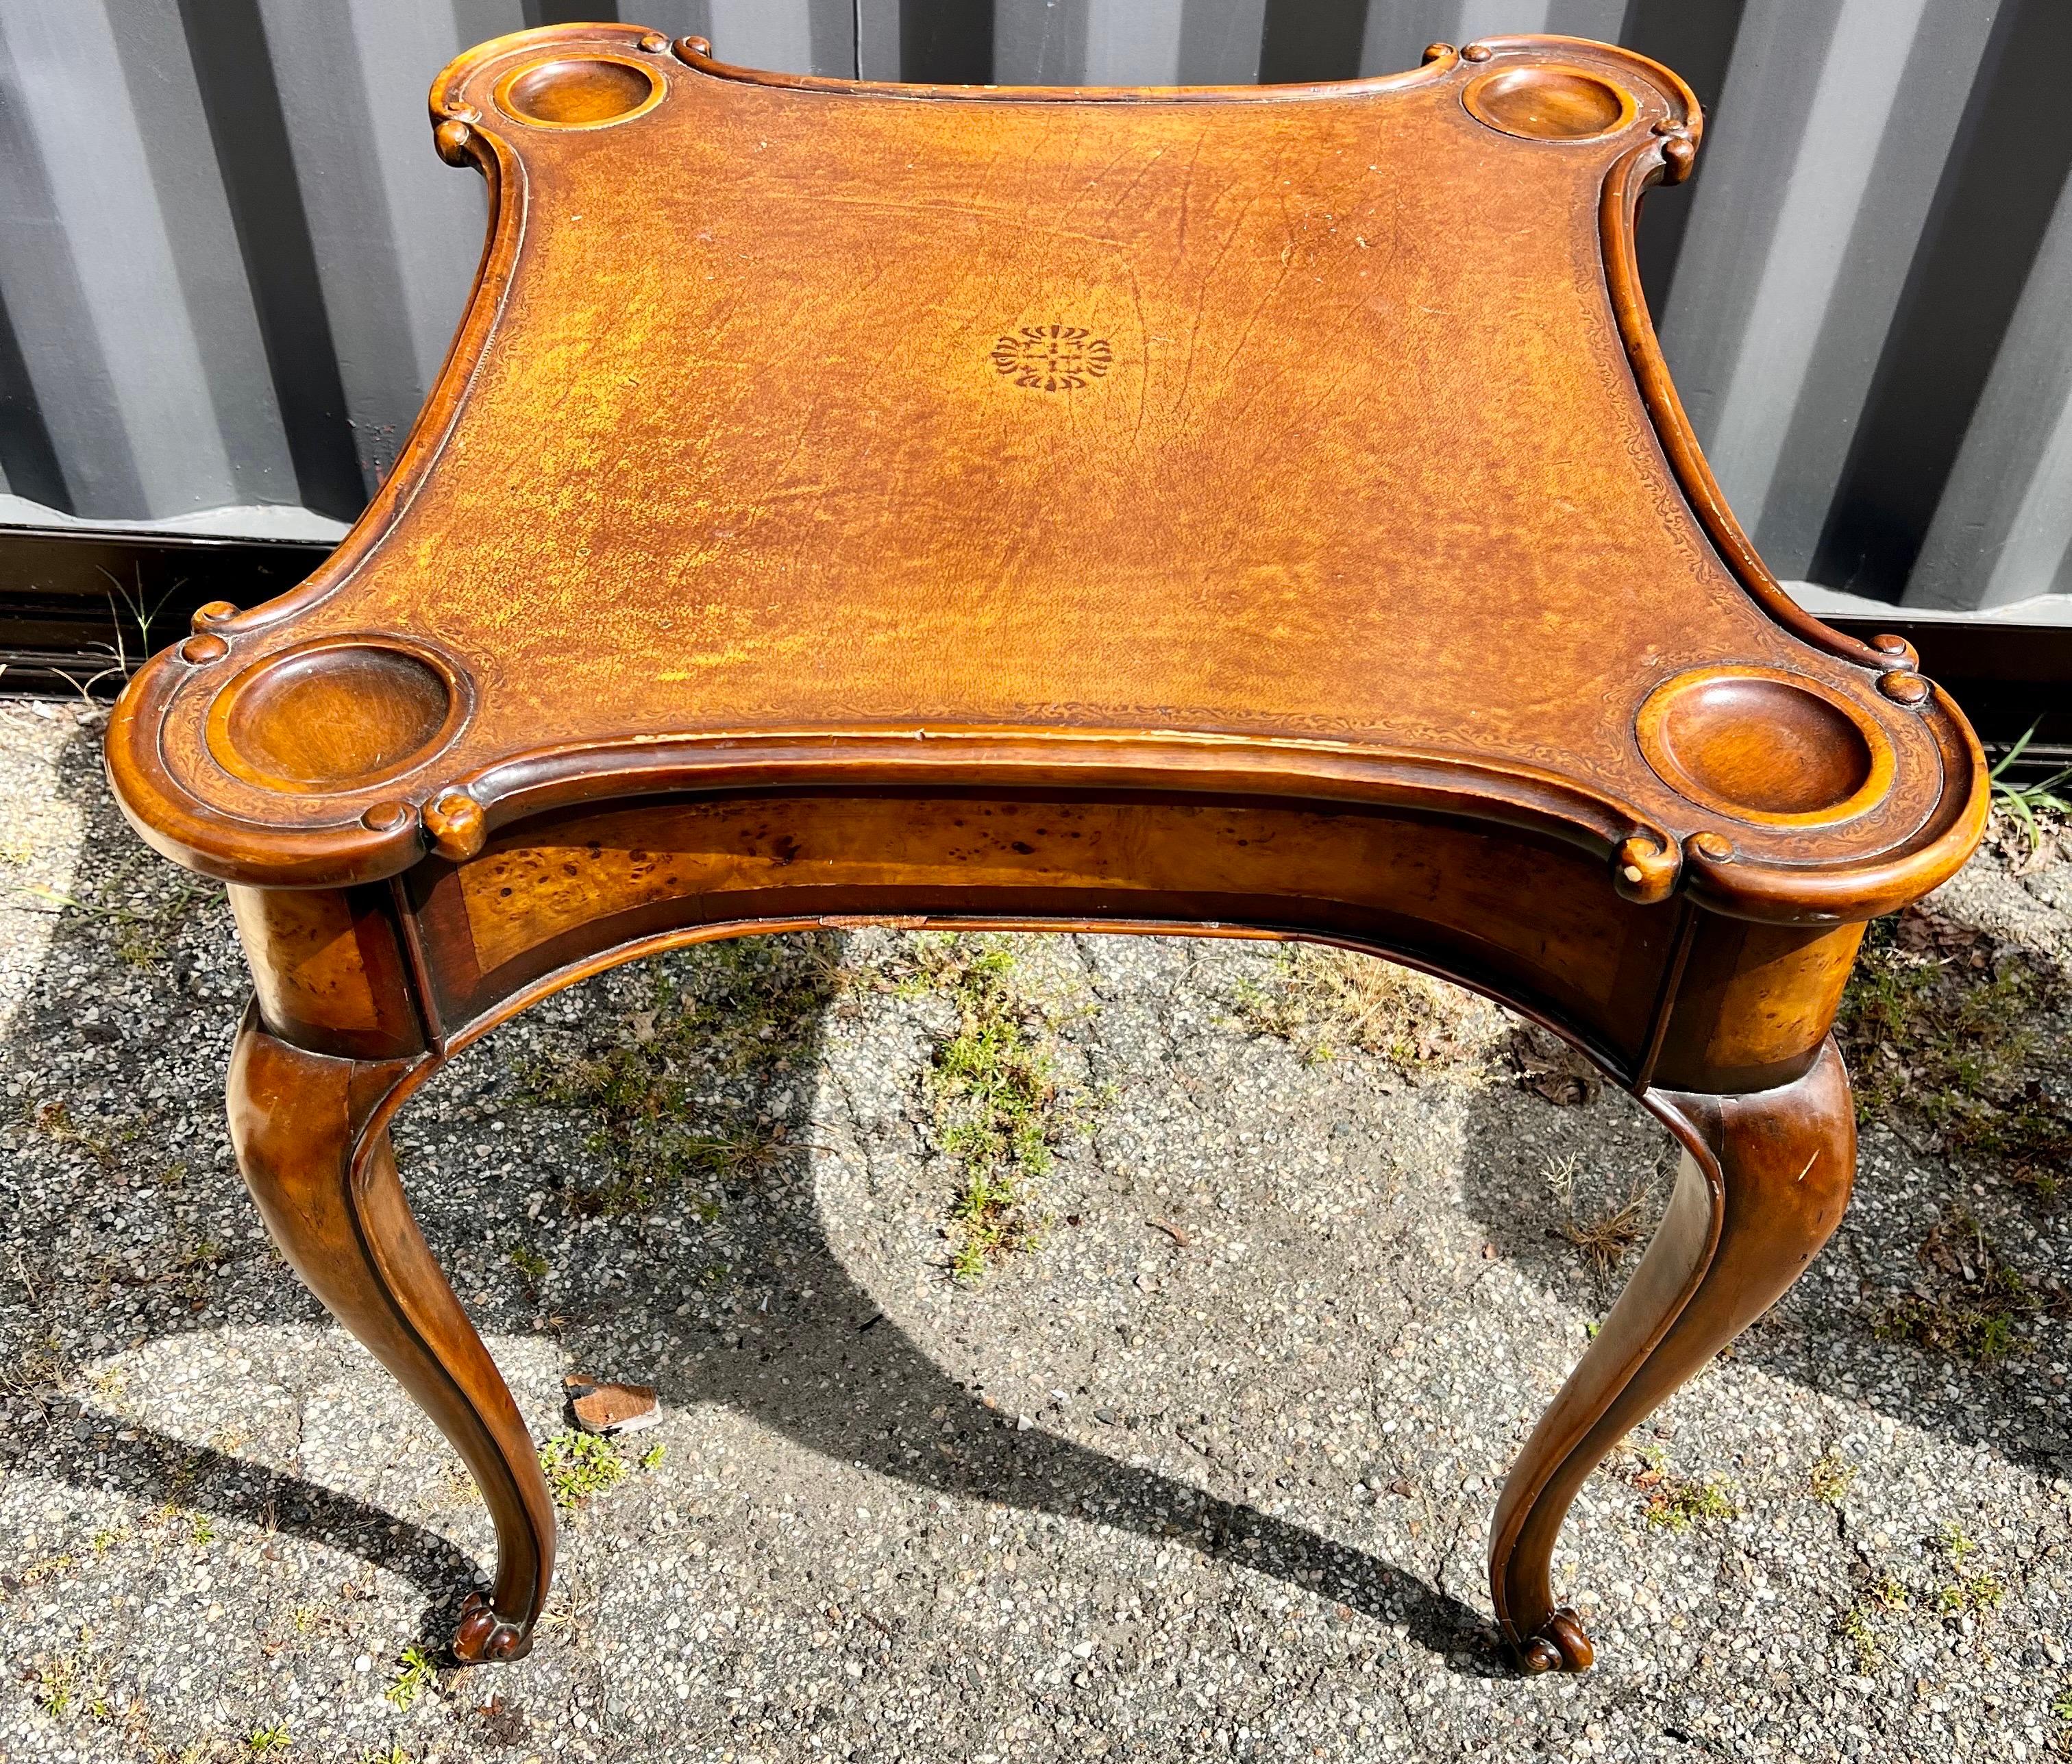 20th Century Signed Theodore Alexander Game Table with Scalloped Edges